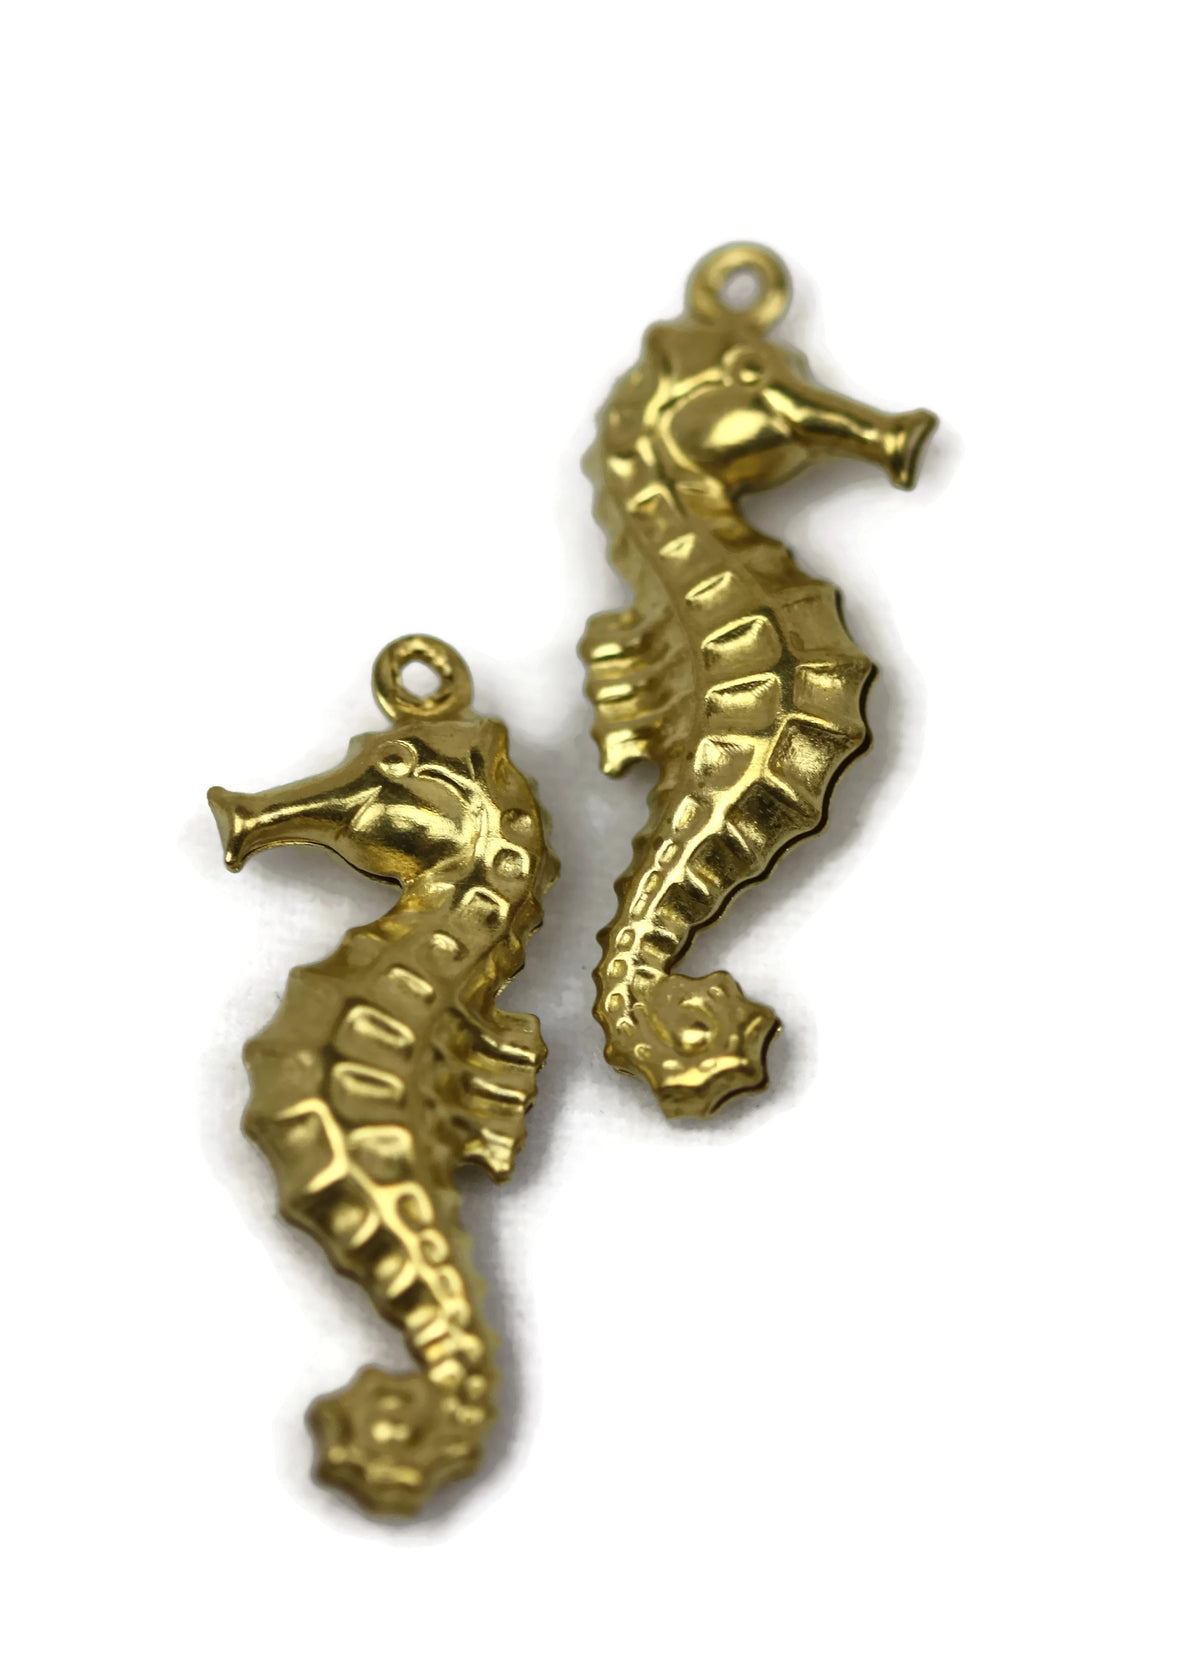 ALMA BEADS Gold Sea Horse Charms 26 mm 25 pcs (BRASS)